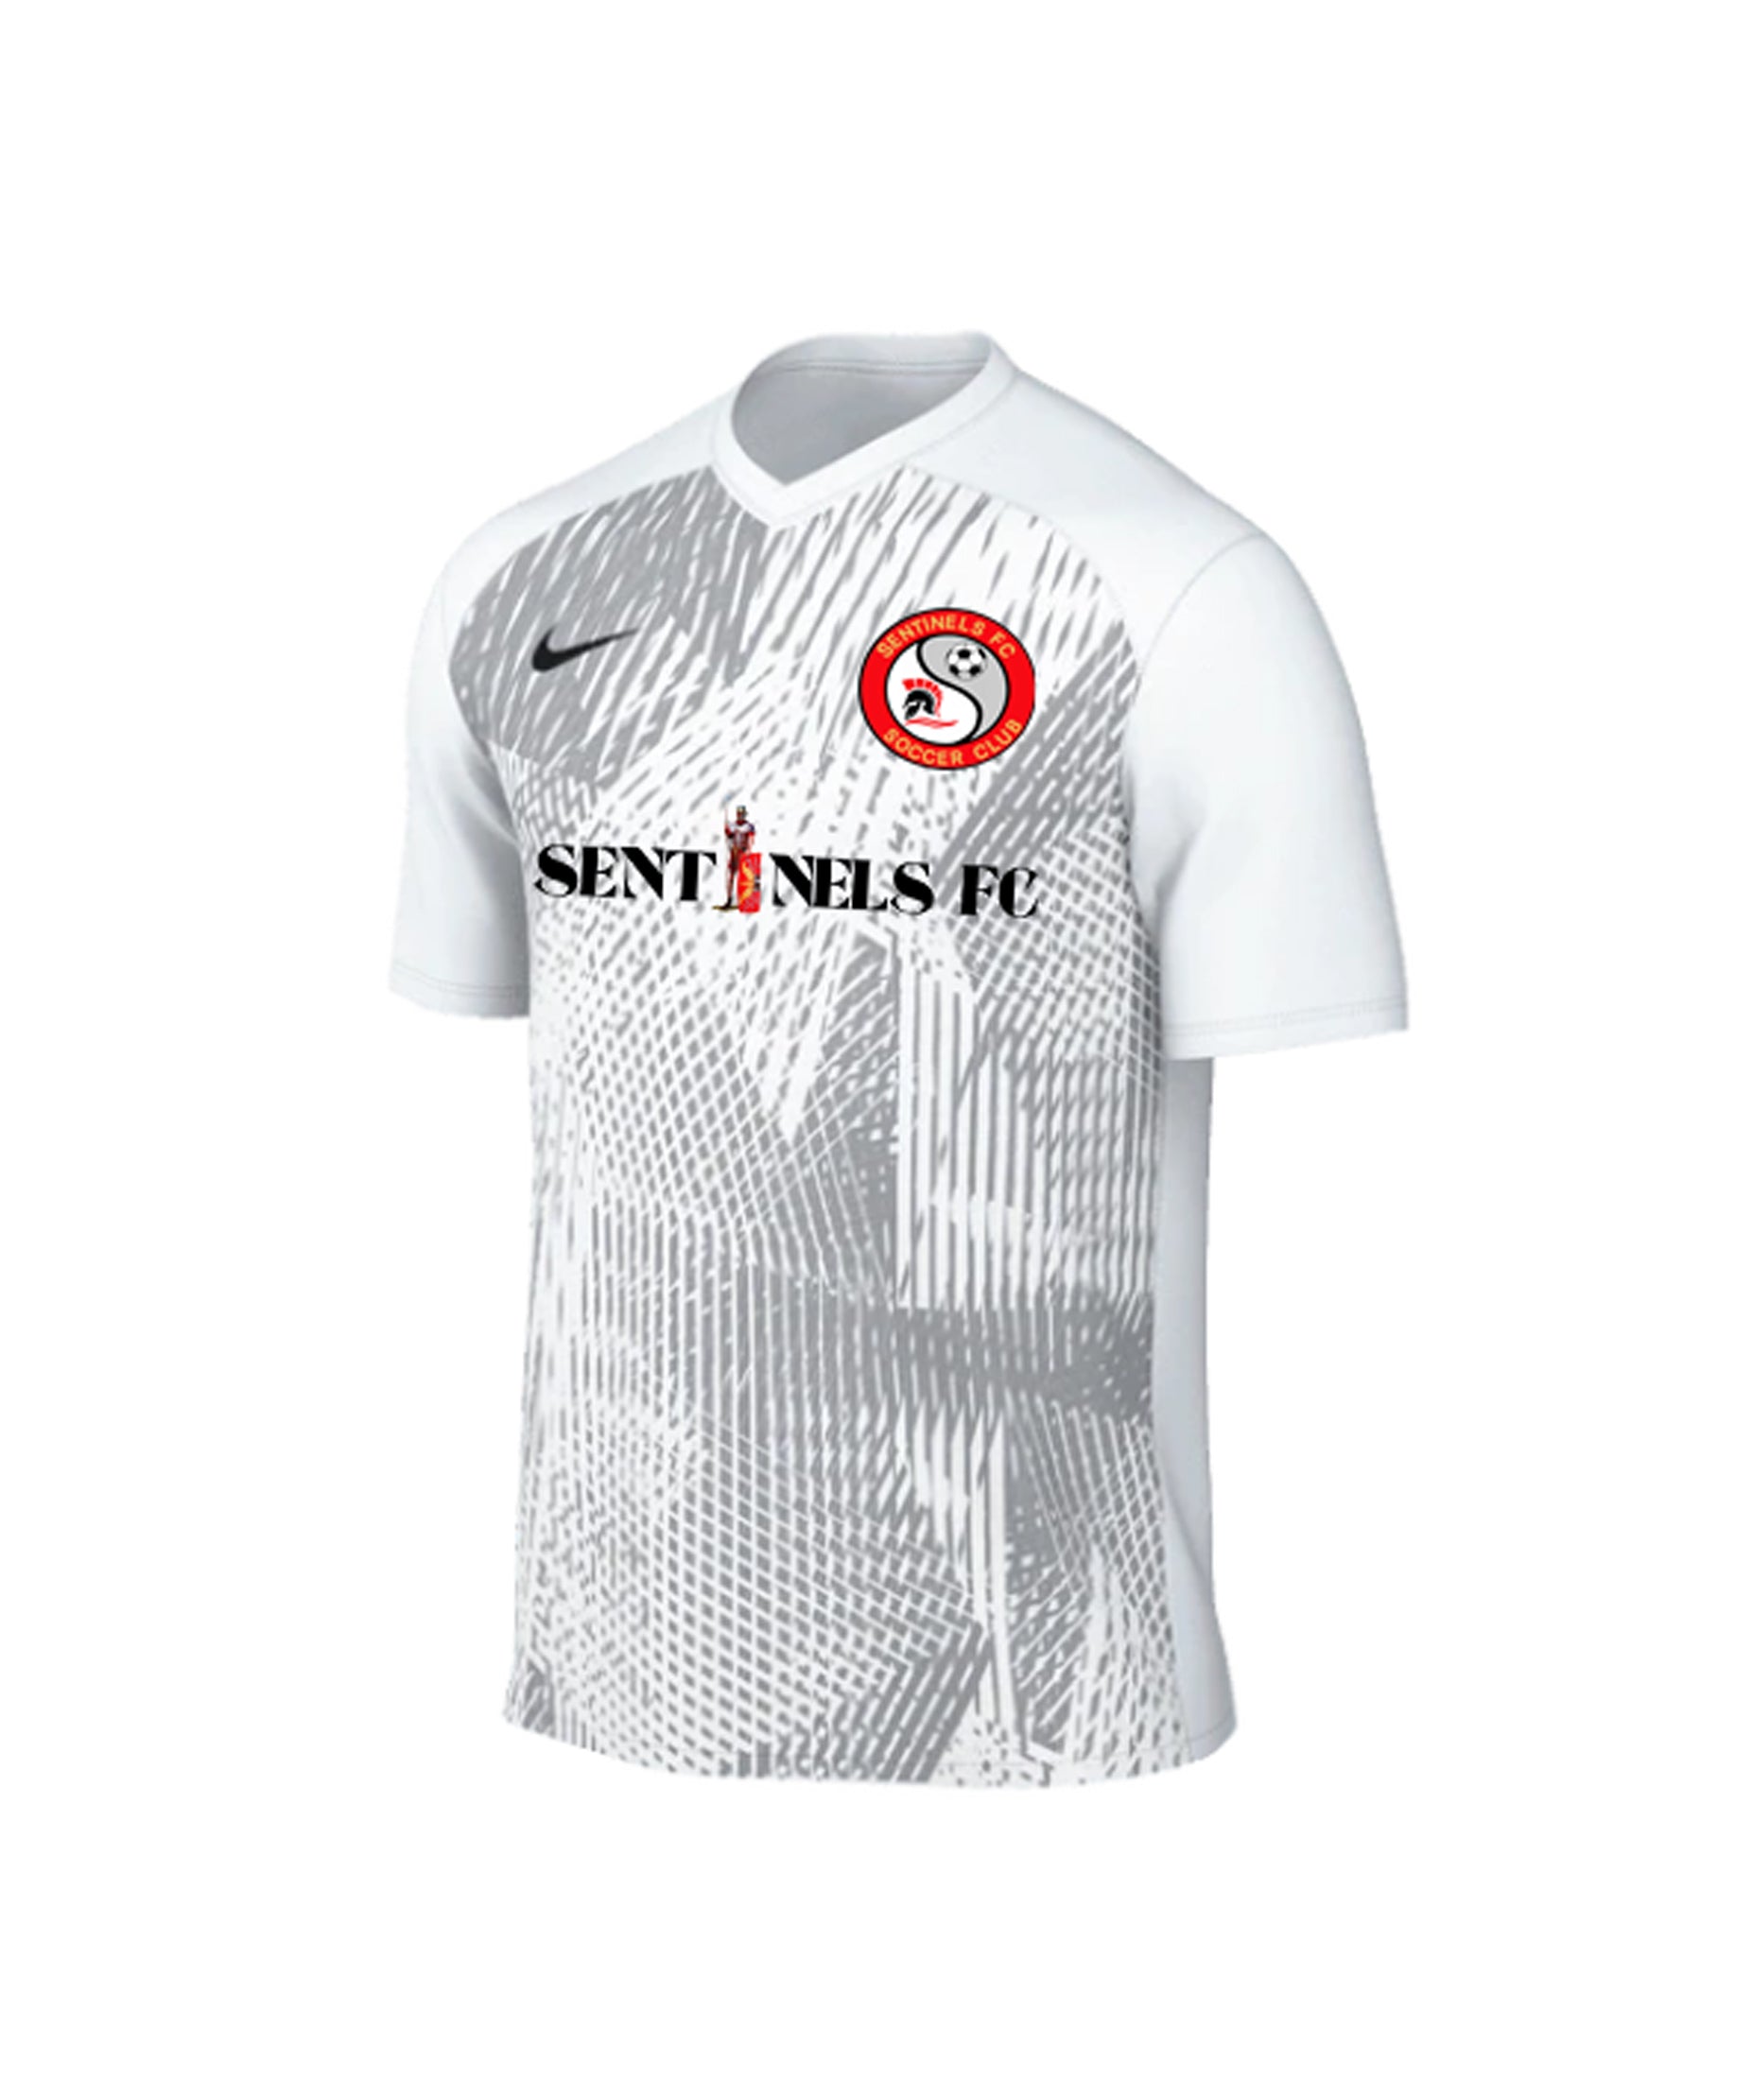 SENTINELS FC NIKE YOUTH AND ADULT PRECISION IV JERSEY - WHITE